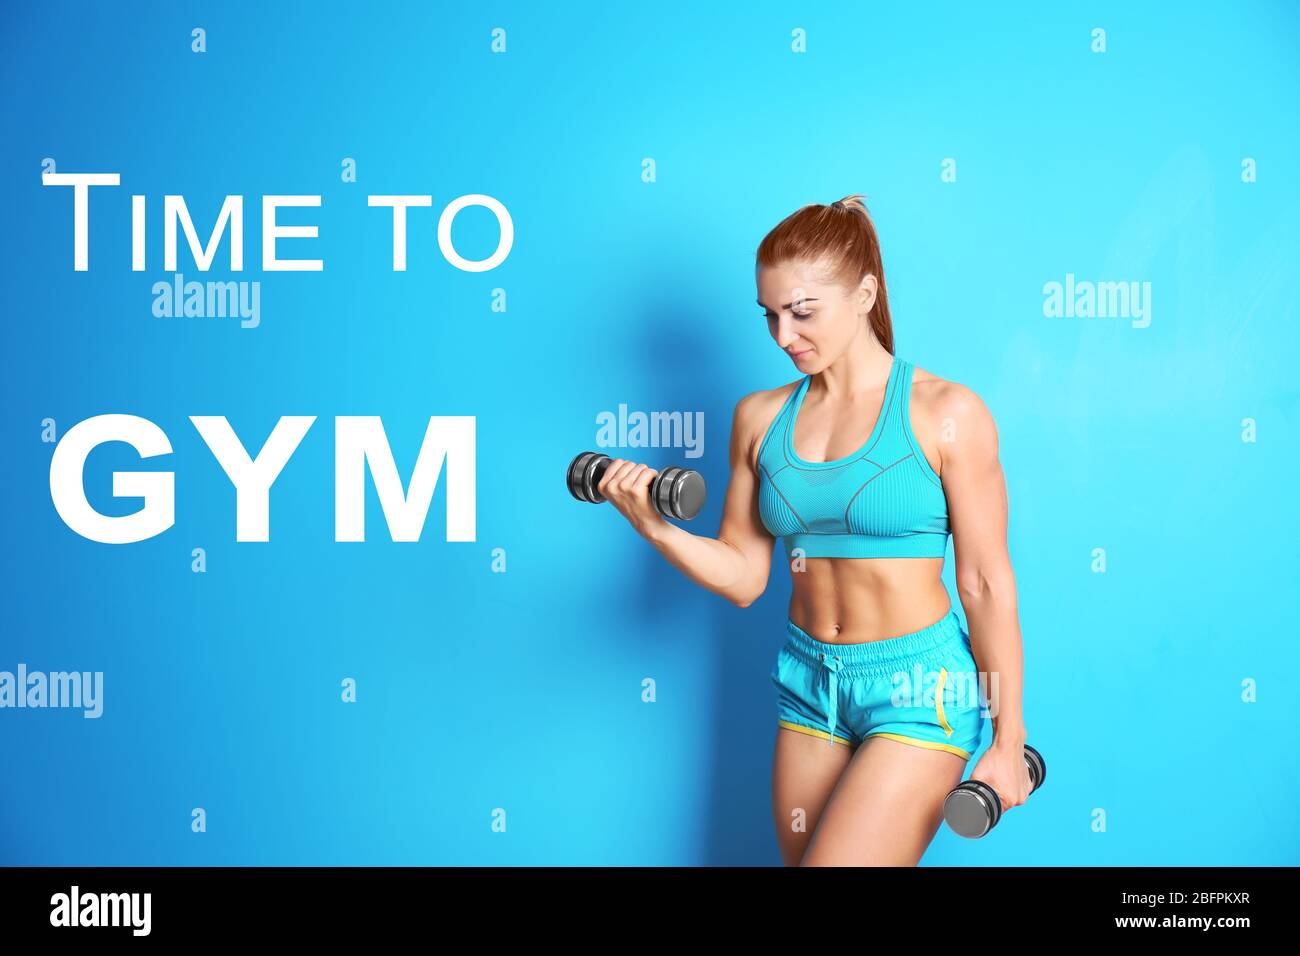 Fitness quotes. Text TIME TO GYM and young woman training with dumbbells on color background Stock Photo